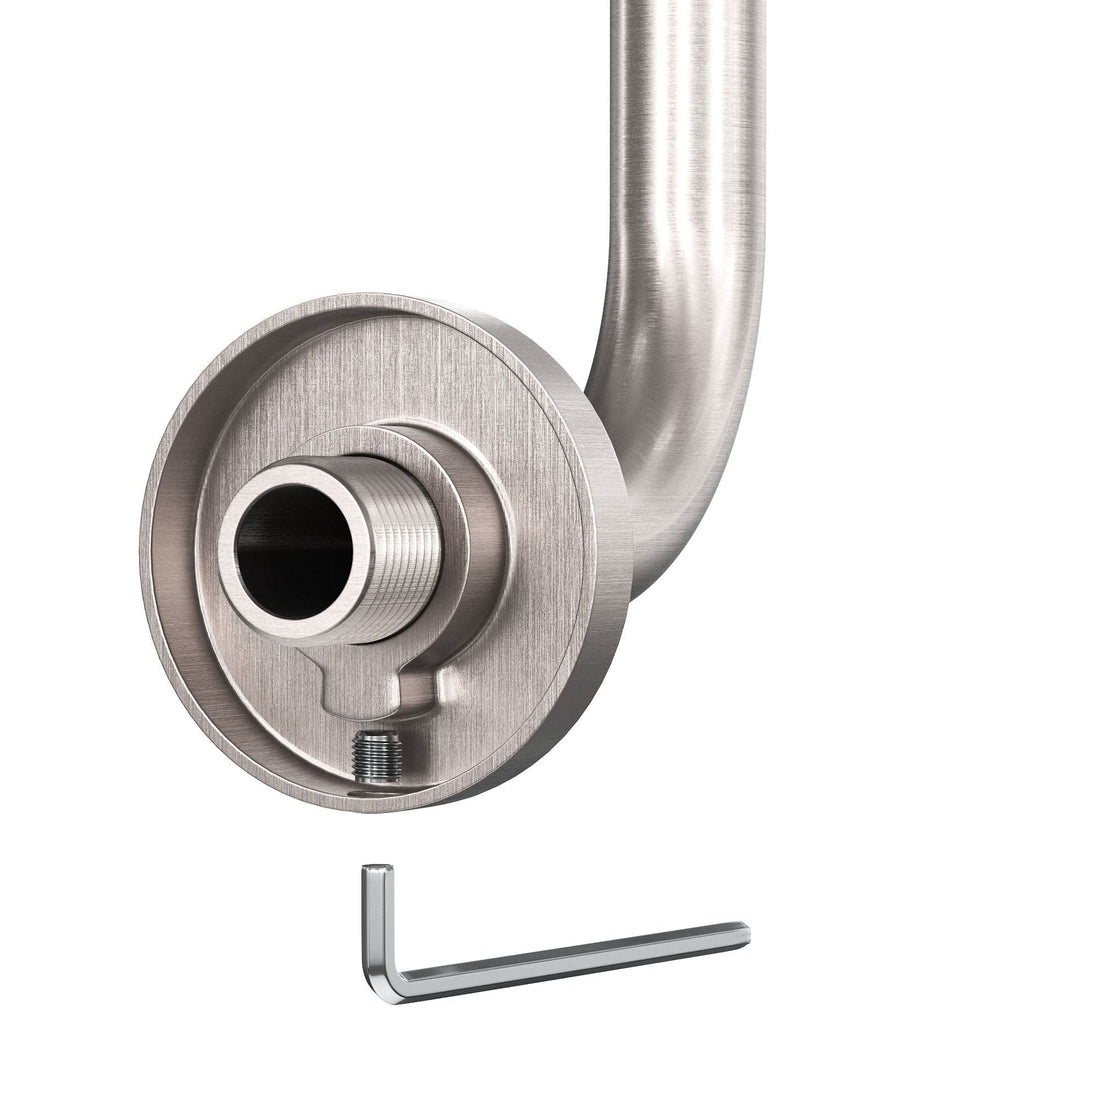 Brushed Nickel Flange Locking Screw - All Metal S Style High Rise Shower Arm and Flange with Set Screw - Wall Elbow Pipe and Cover Plate to Raise Showerhead Height - Universal Replacement Part for Showerheads - The Shower Head Store